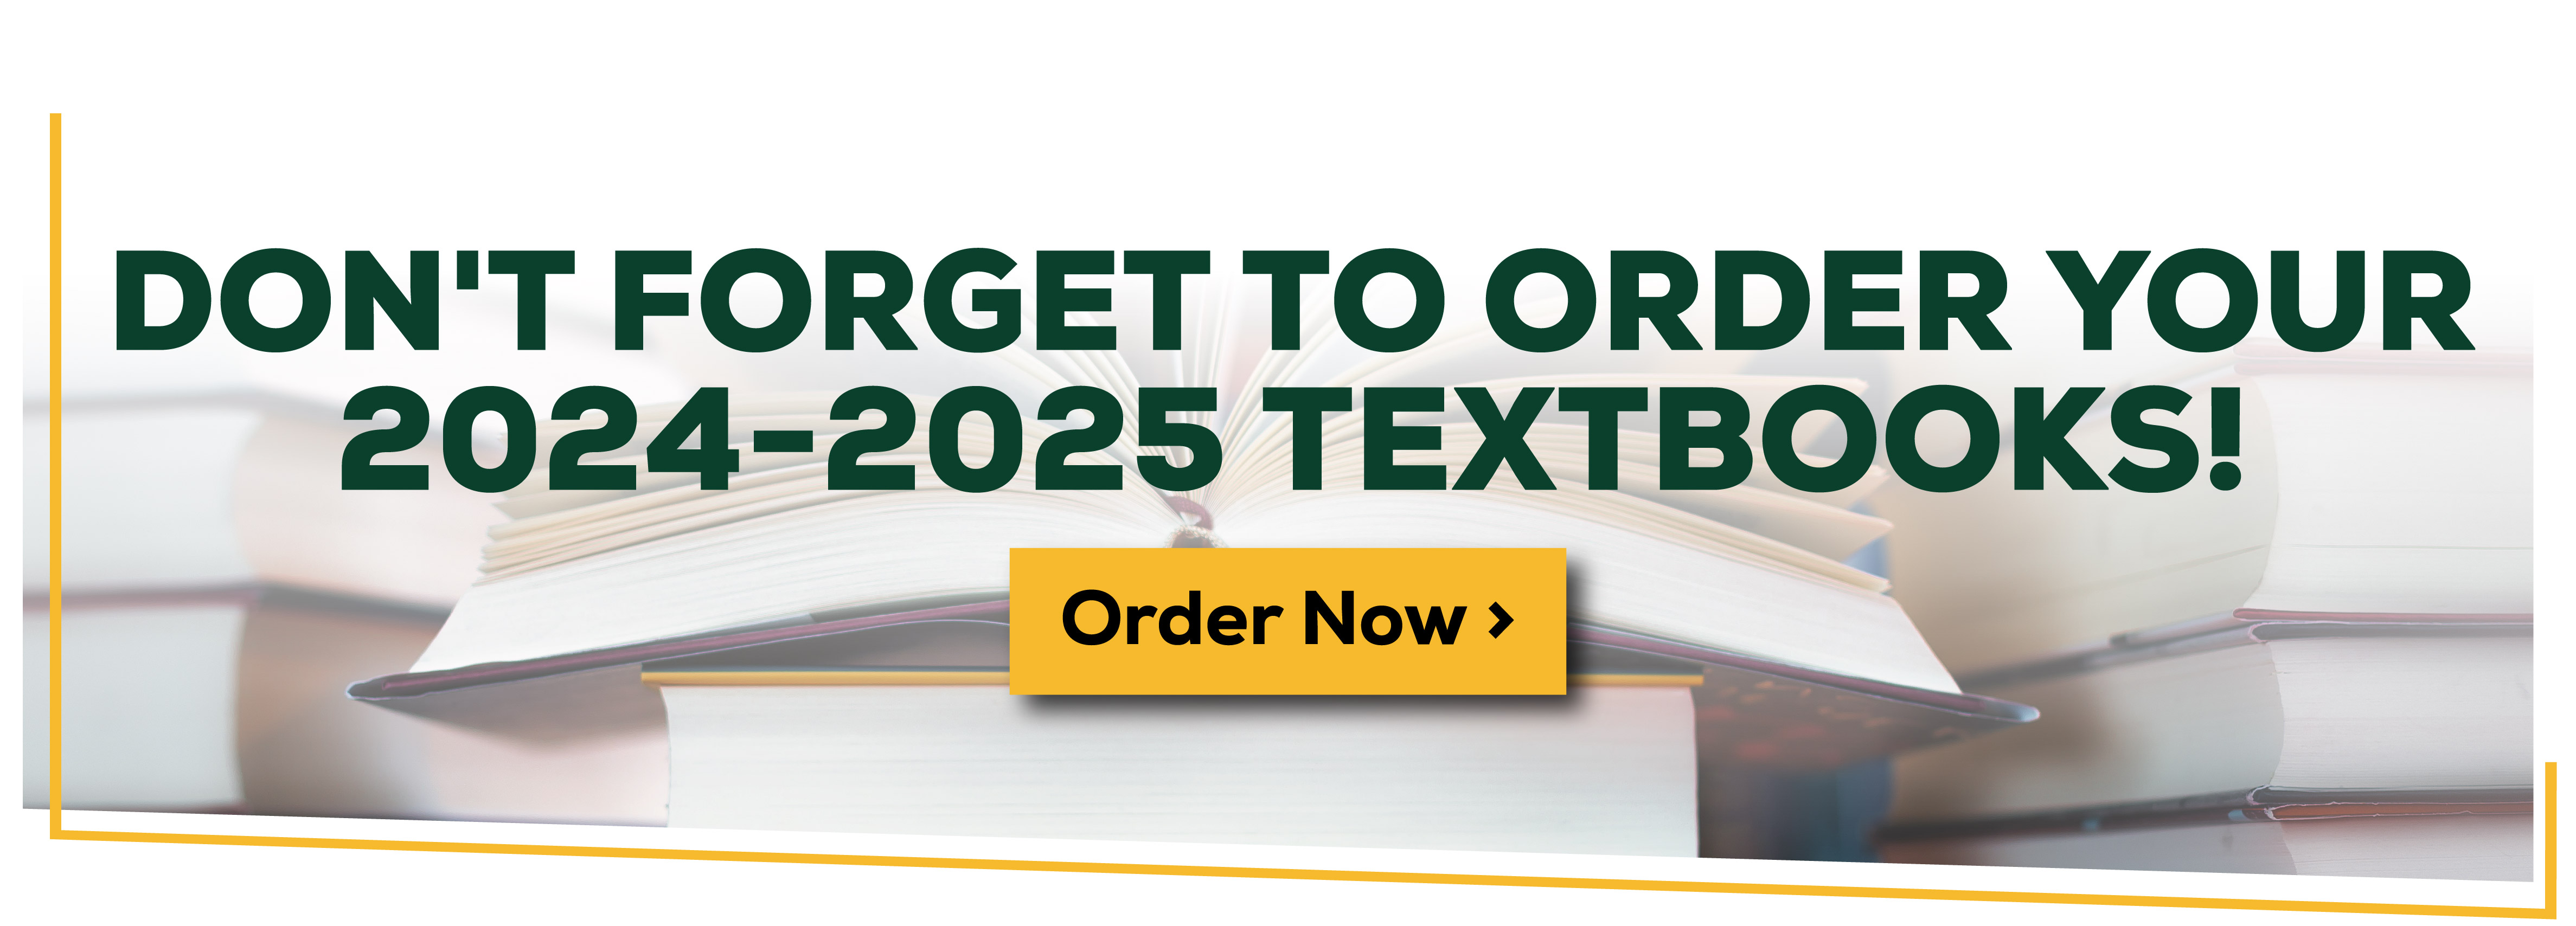 Don't forget to order your 2024-2025 textbooks. Order now